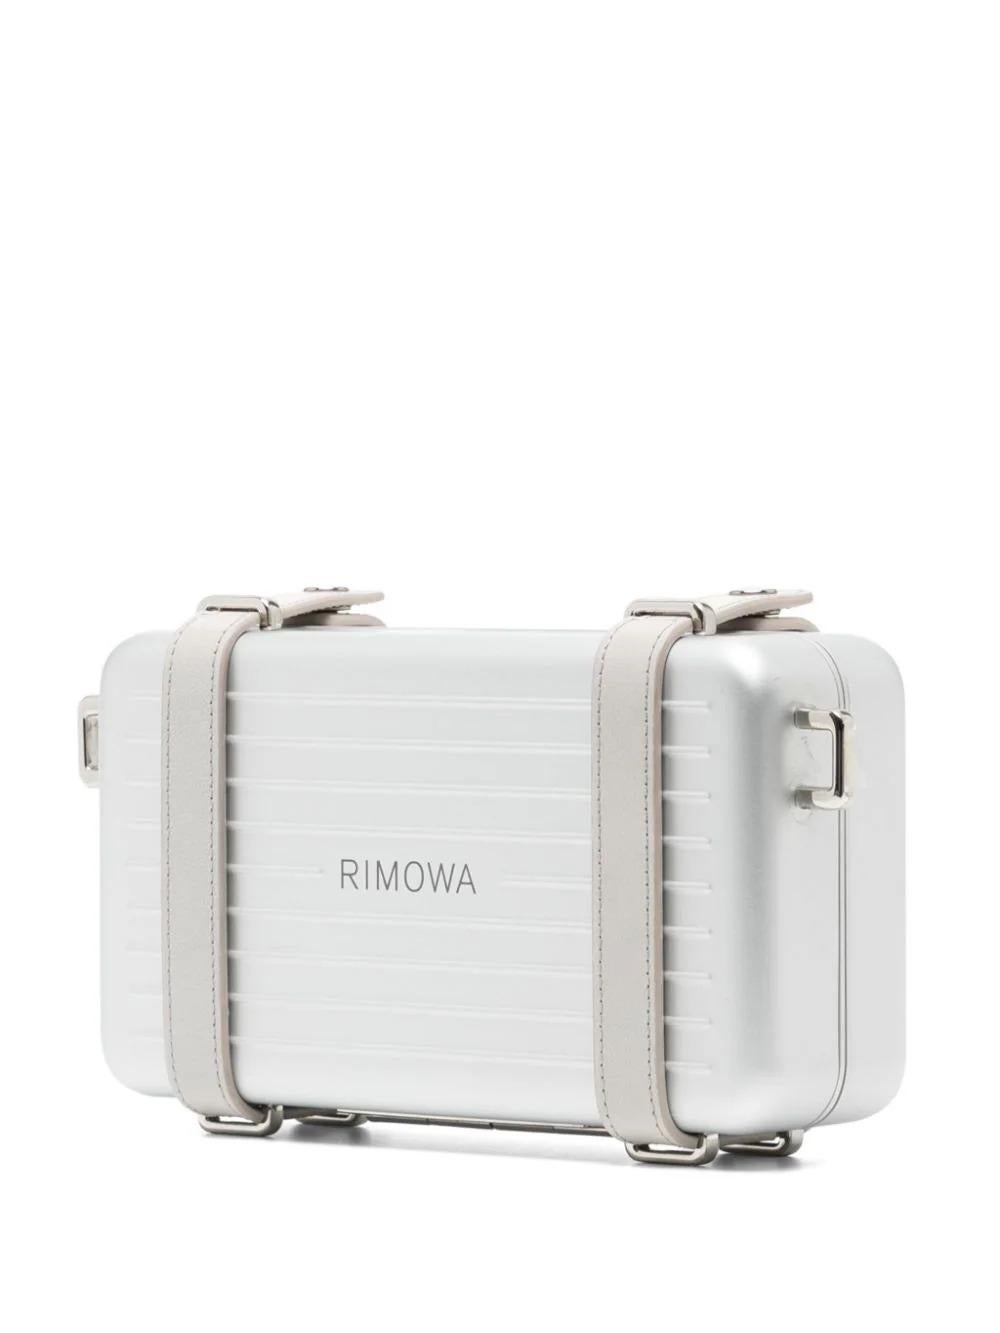 Expertly crafted and limited edition, the Dior x Rimowa Clutch is a statement piece that showcases a collaboration between two renowned brands. Made with the highest quality materials, this silver bag from the collection exudes luxury and style.